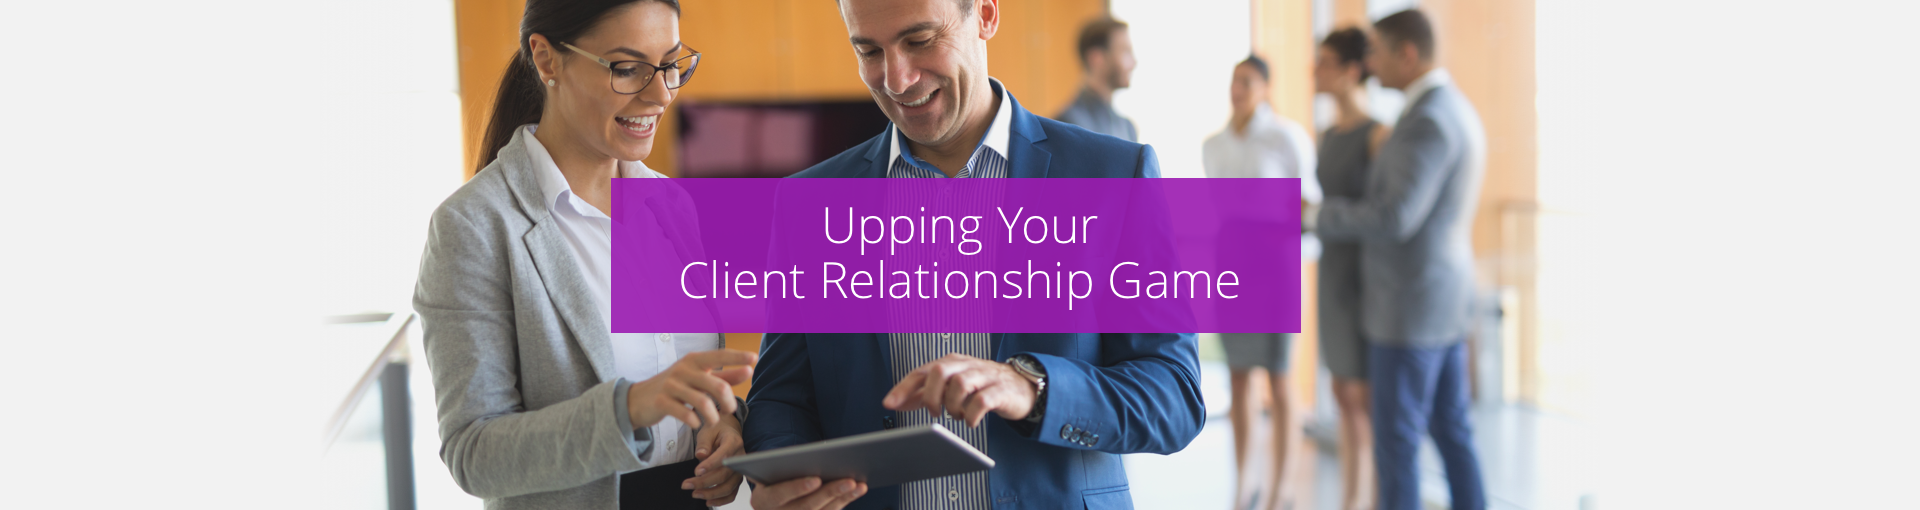 Upping Your Client Relationship Game Featured Image